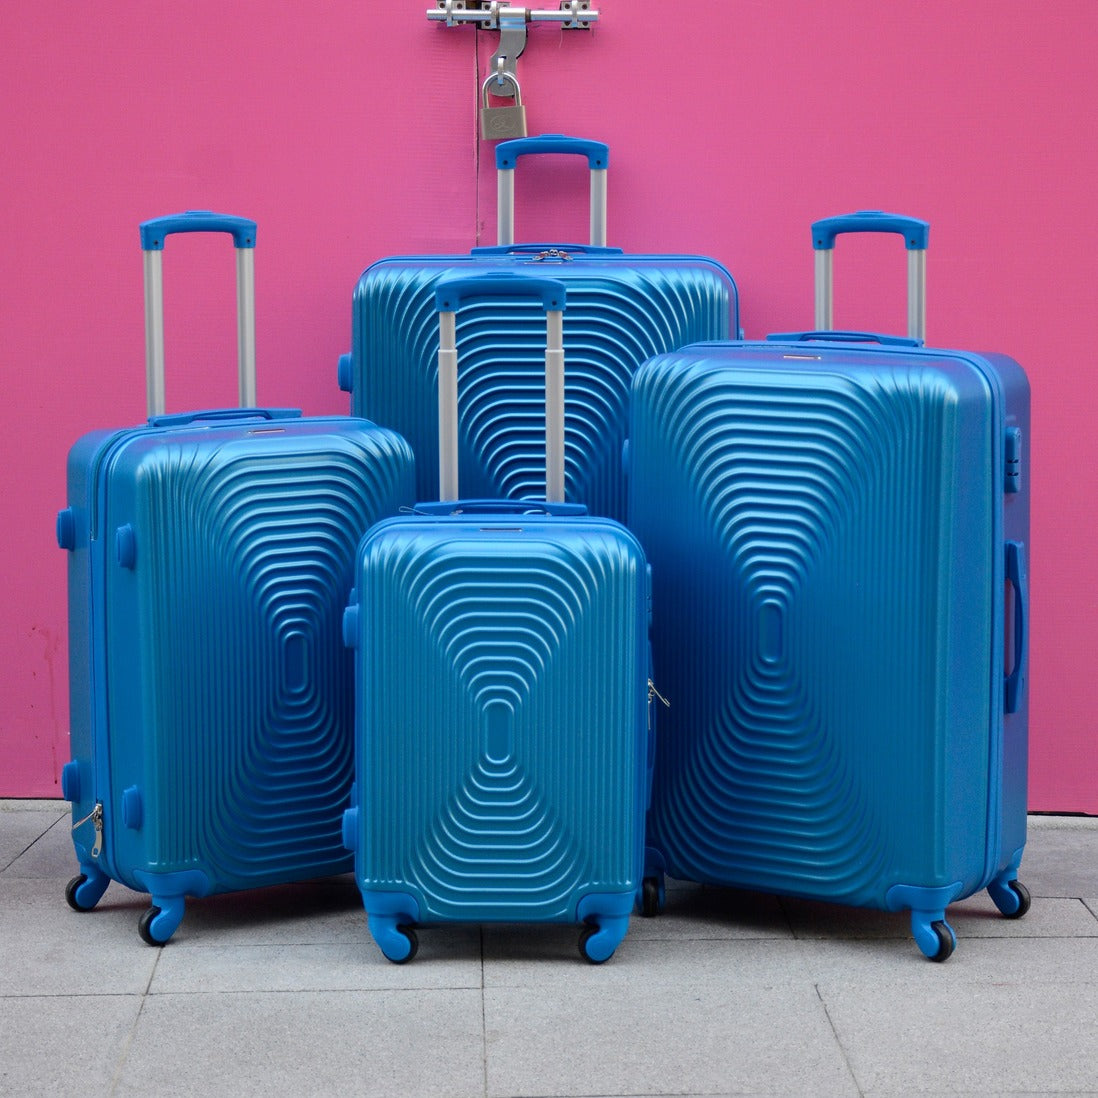 3 Pcs Full Set 20" 24" 28 Inches Blue Fashion ABS Lightweight Hard Case Trolley Luggage